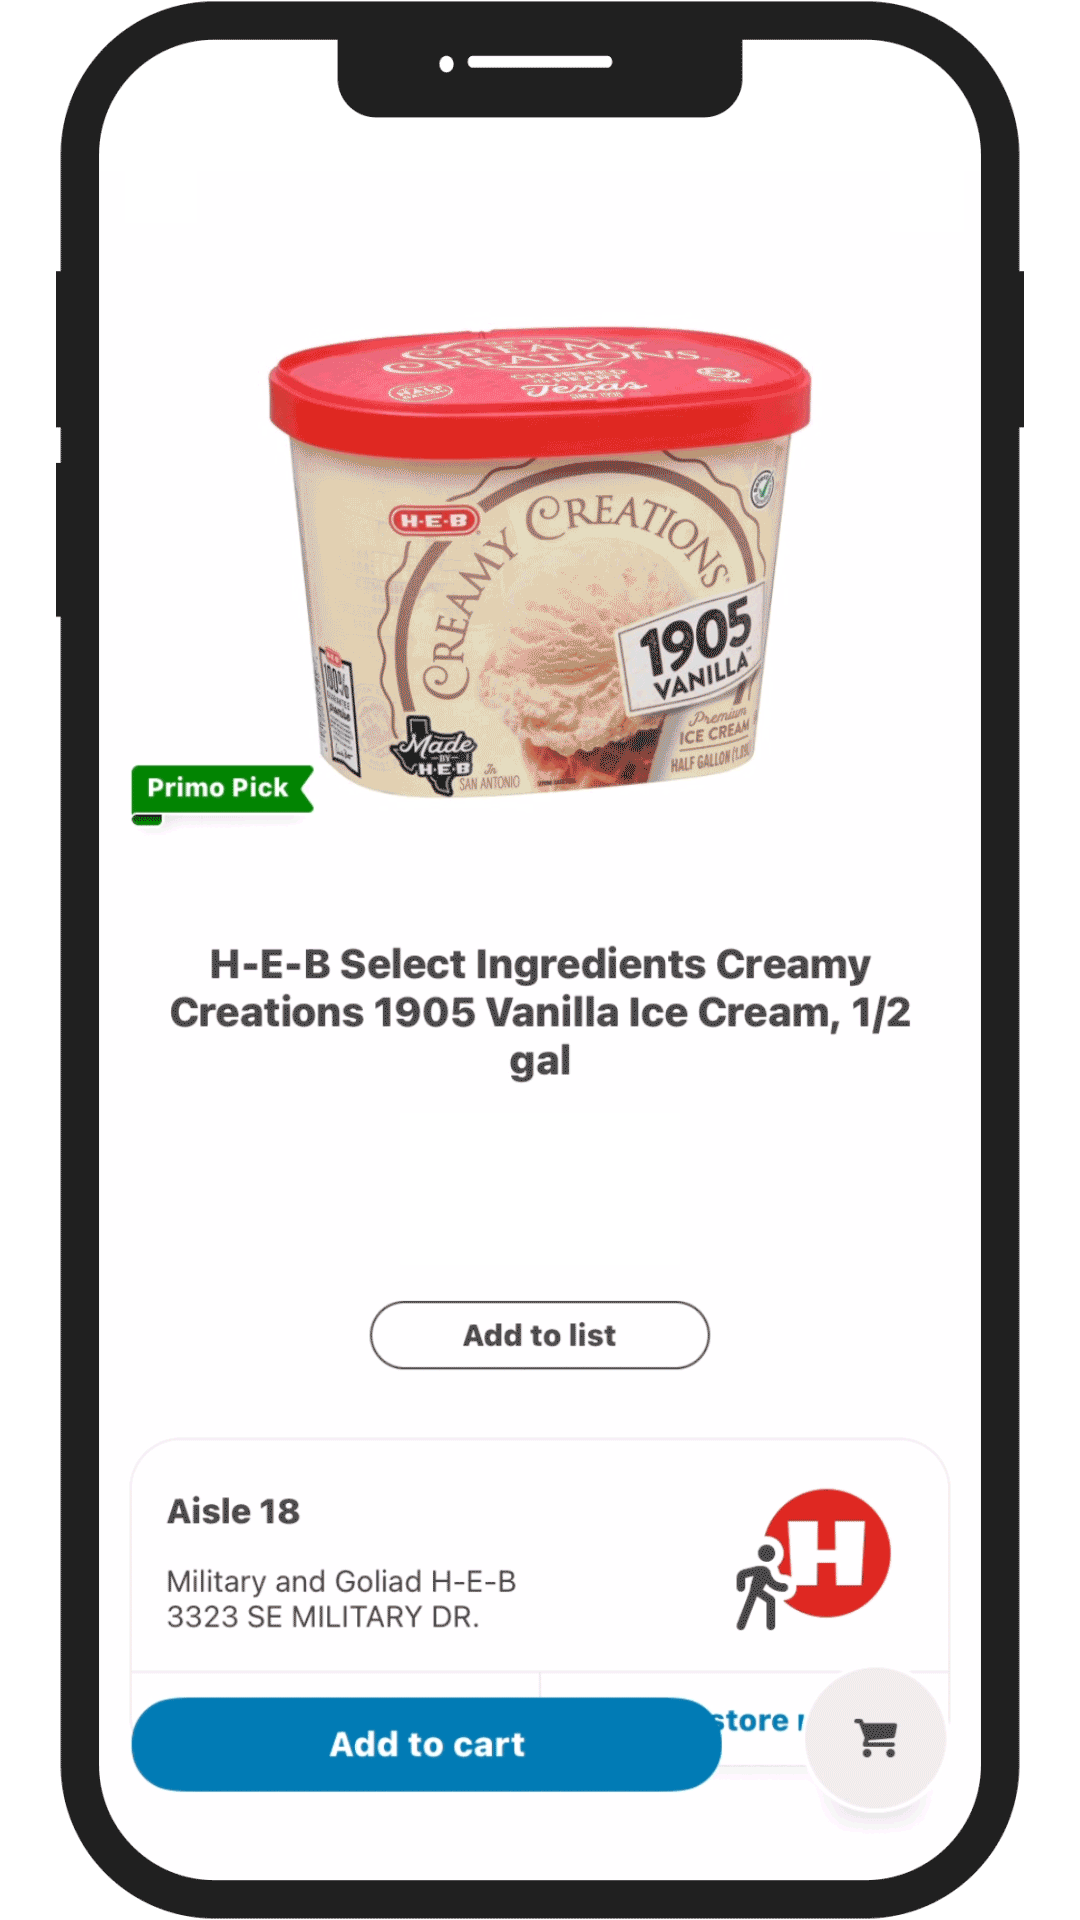 https://images.heb.com/is/content/HEBGrocery/mobile-lp-header-curbside_1